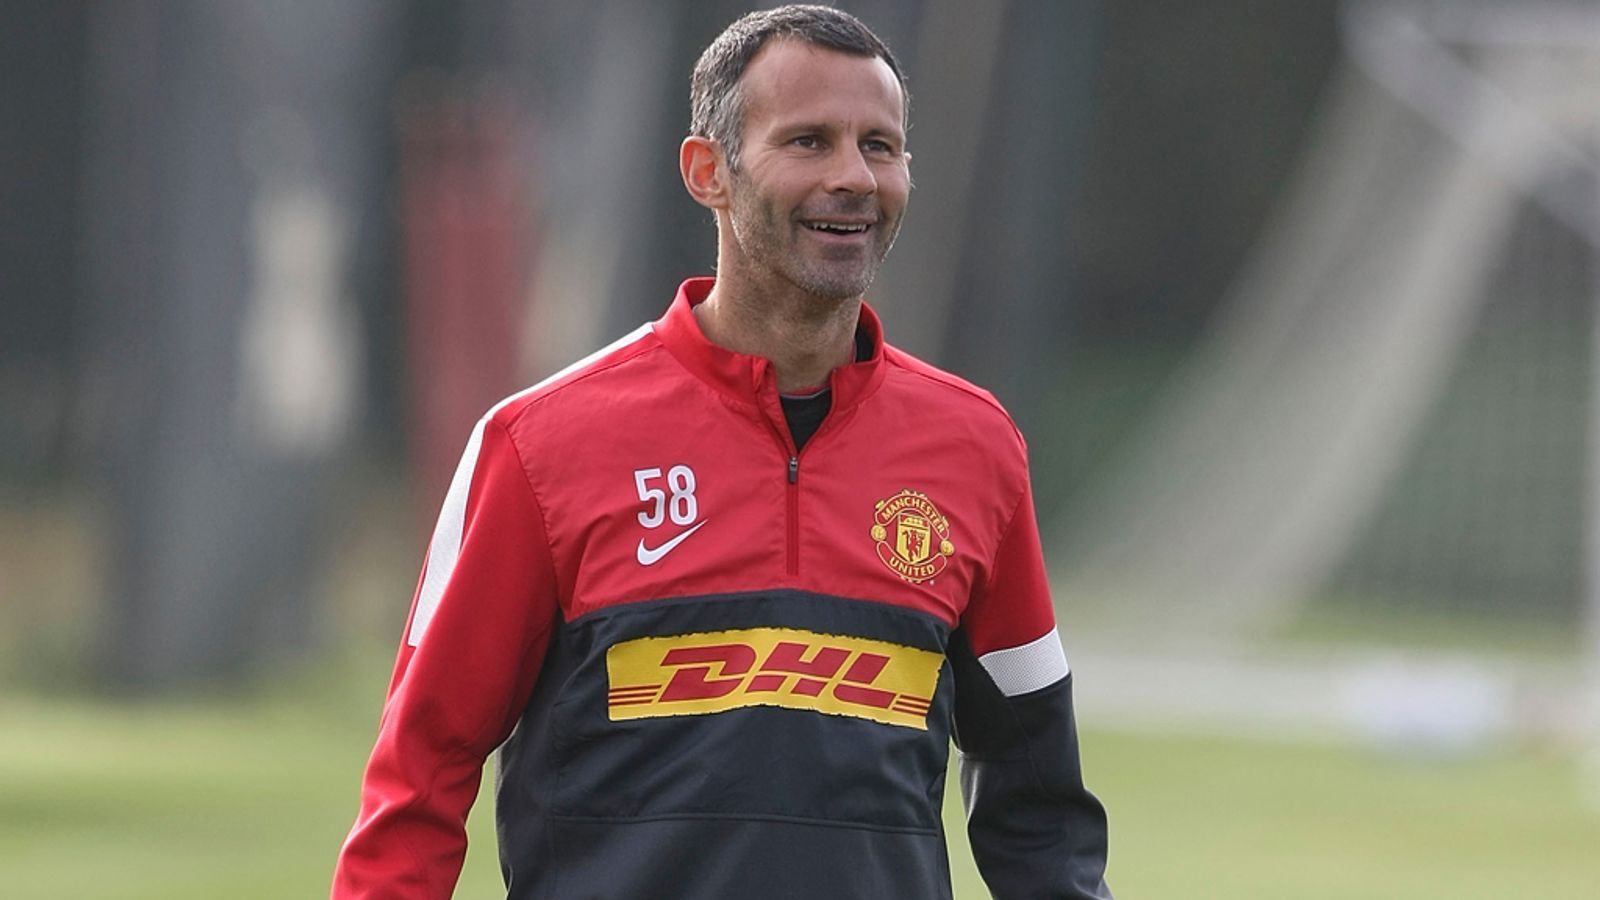 Ryan Giggs Praised by Athletic Bilbao for His Many of Years of Service to Manchester United